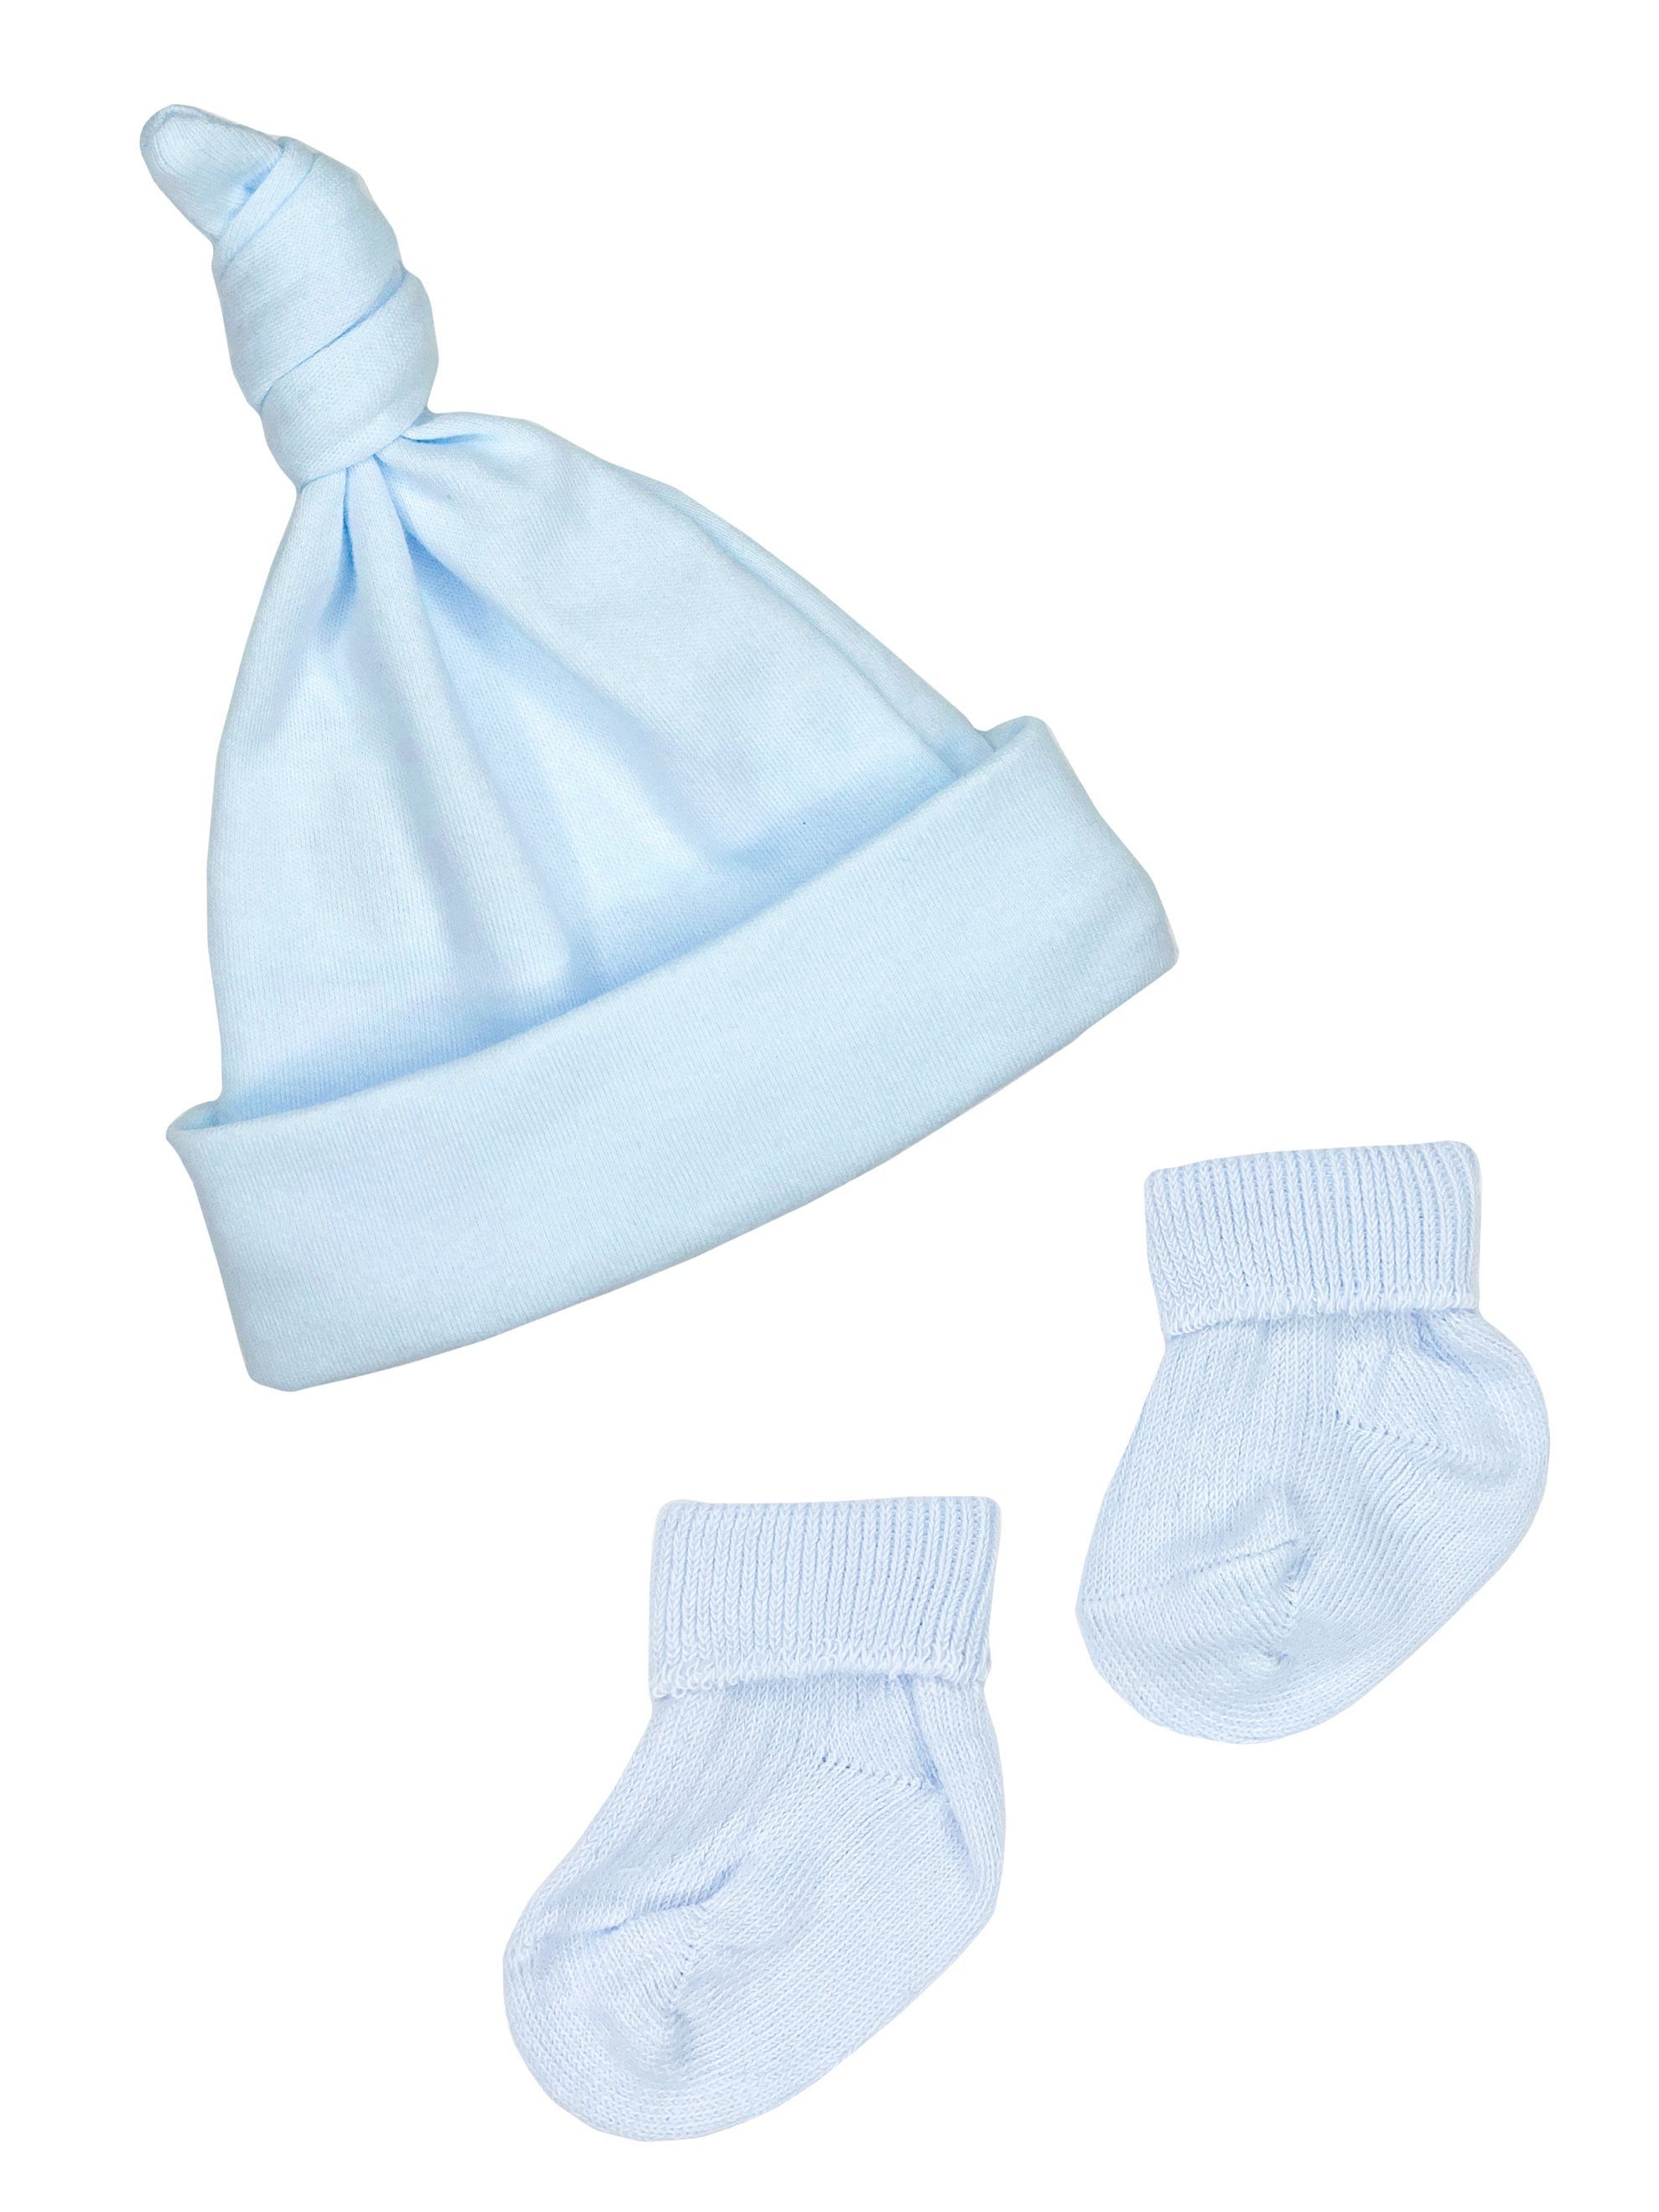 Premature Baby Knotted Hat and Socks Set - Blue - Hat, Mitts & Booties Set - Little Mouse Baby Clothing & Gifts